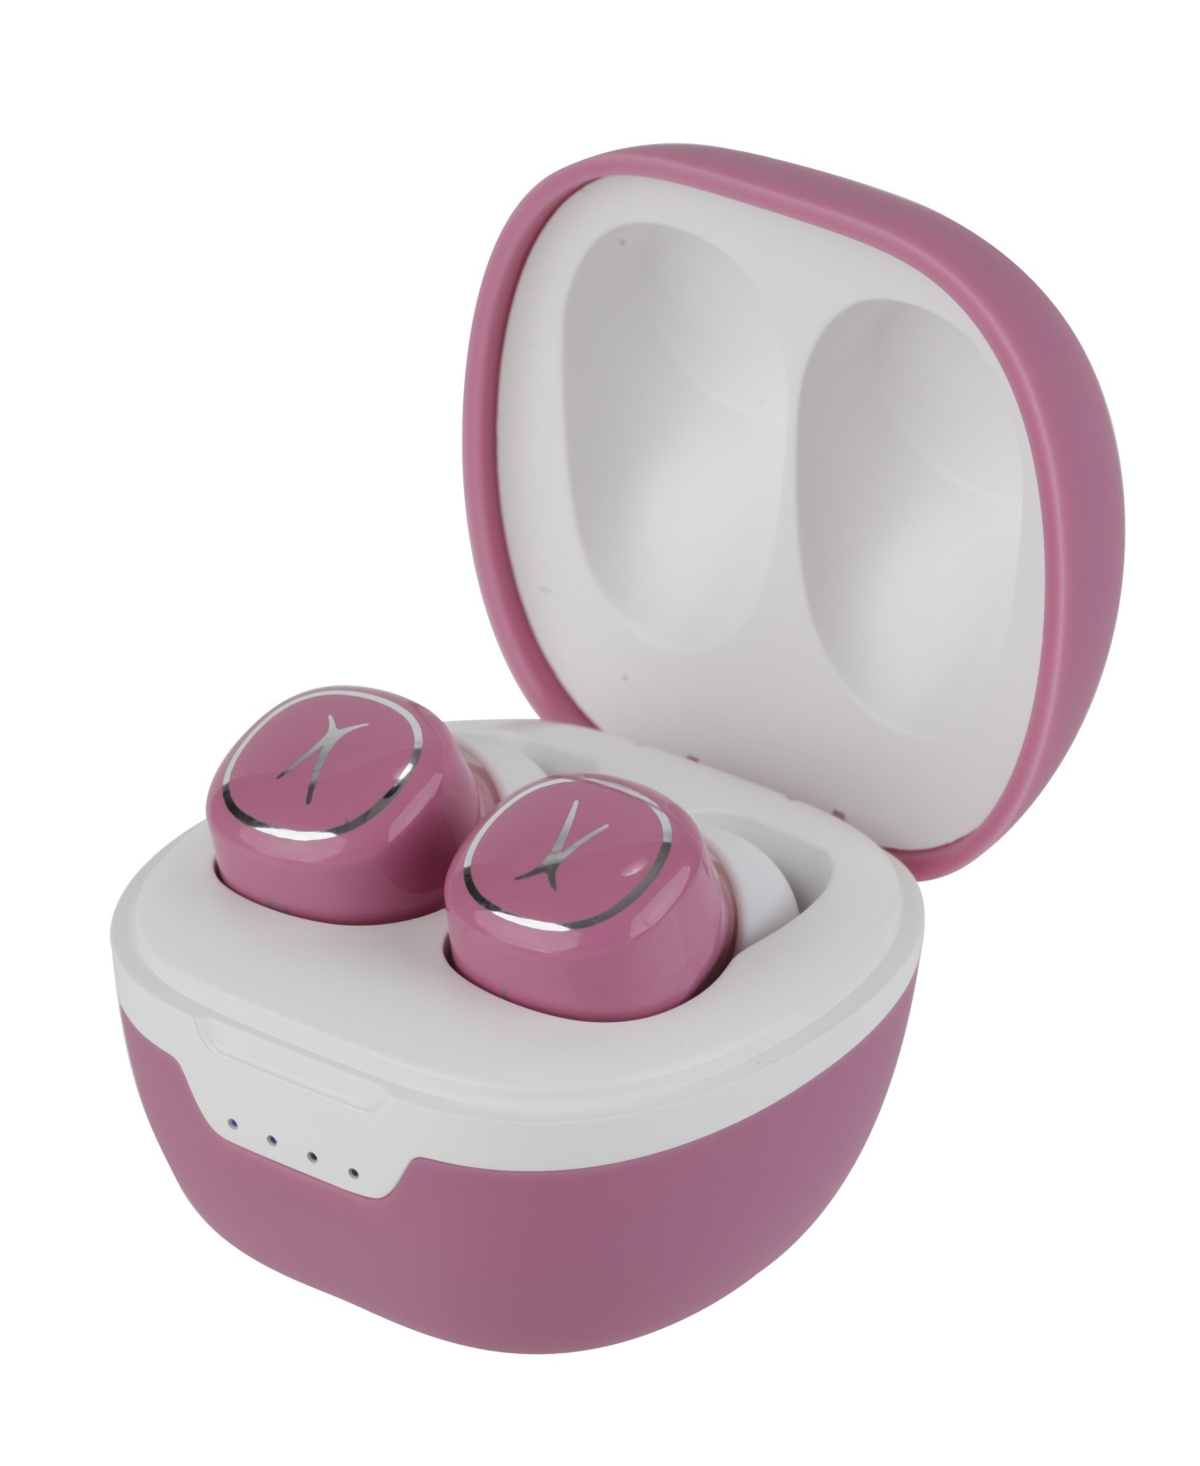 Altec Lansing Nanobud 2.0 True Wireless, Earbuds With Charging Case In Pink